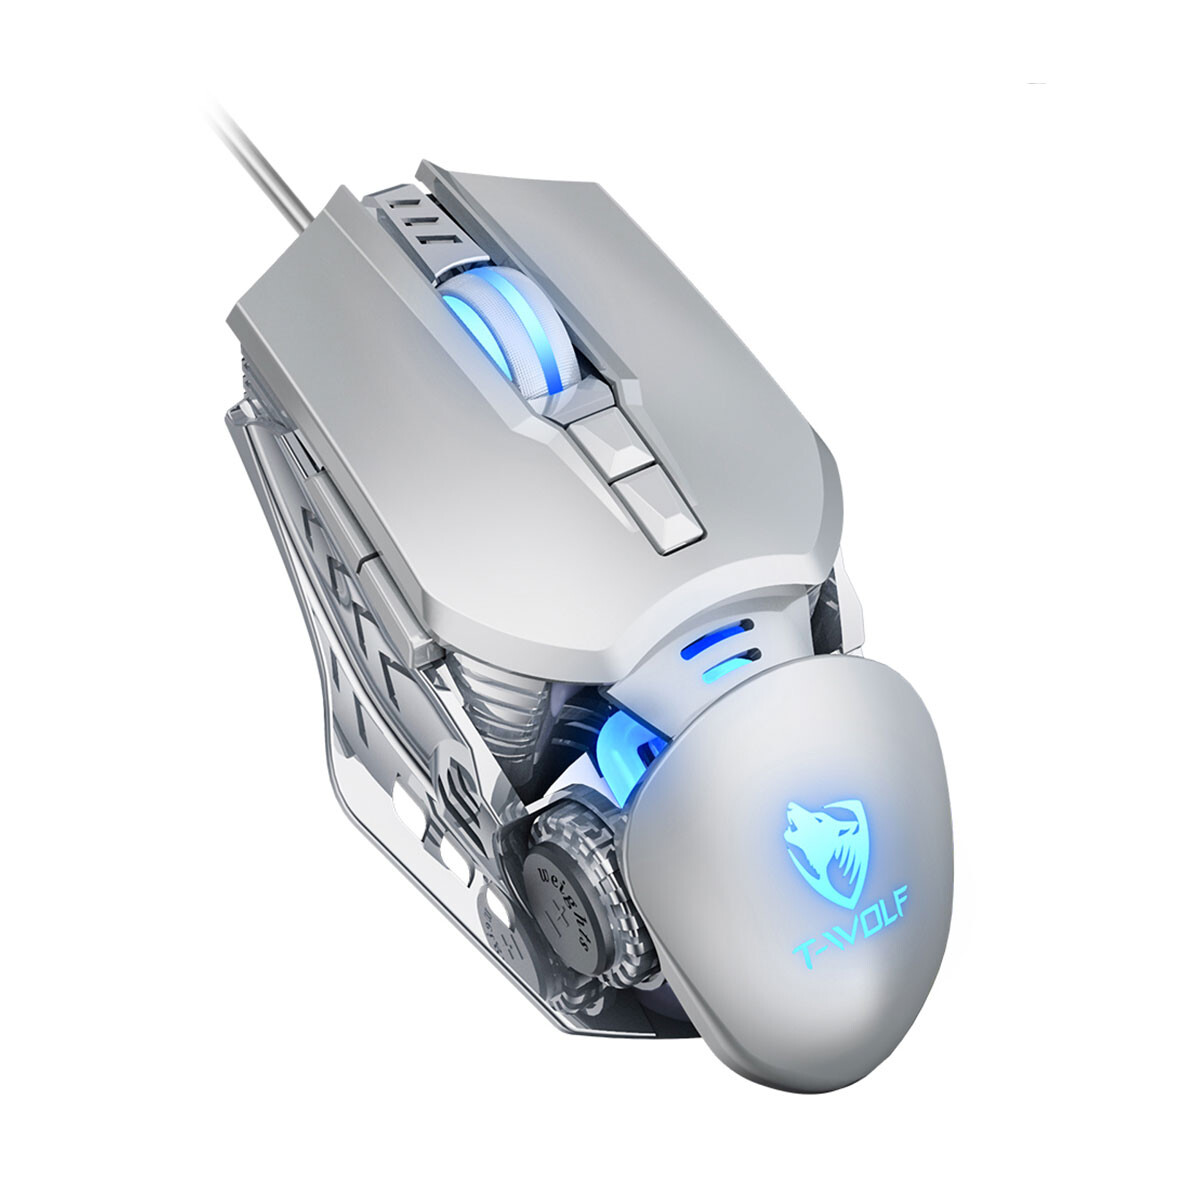 MOUSE GAMER CON CABLE TWOLF - G530GR - GRIS 